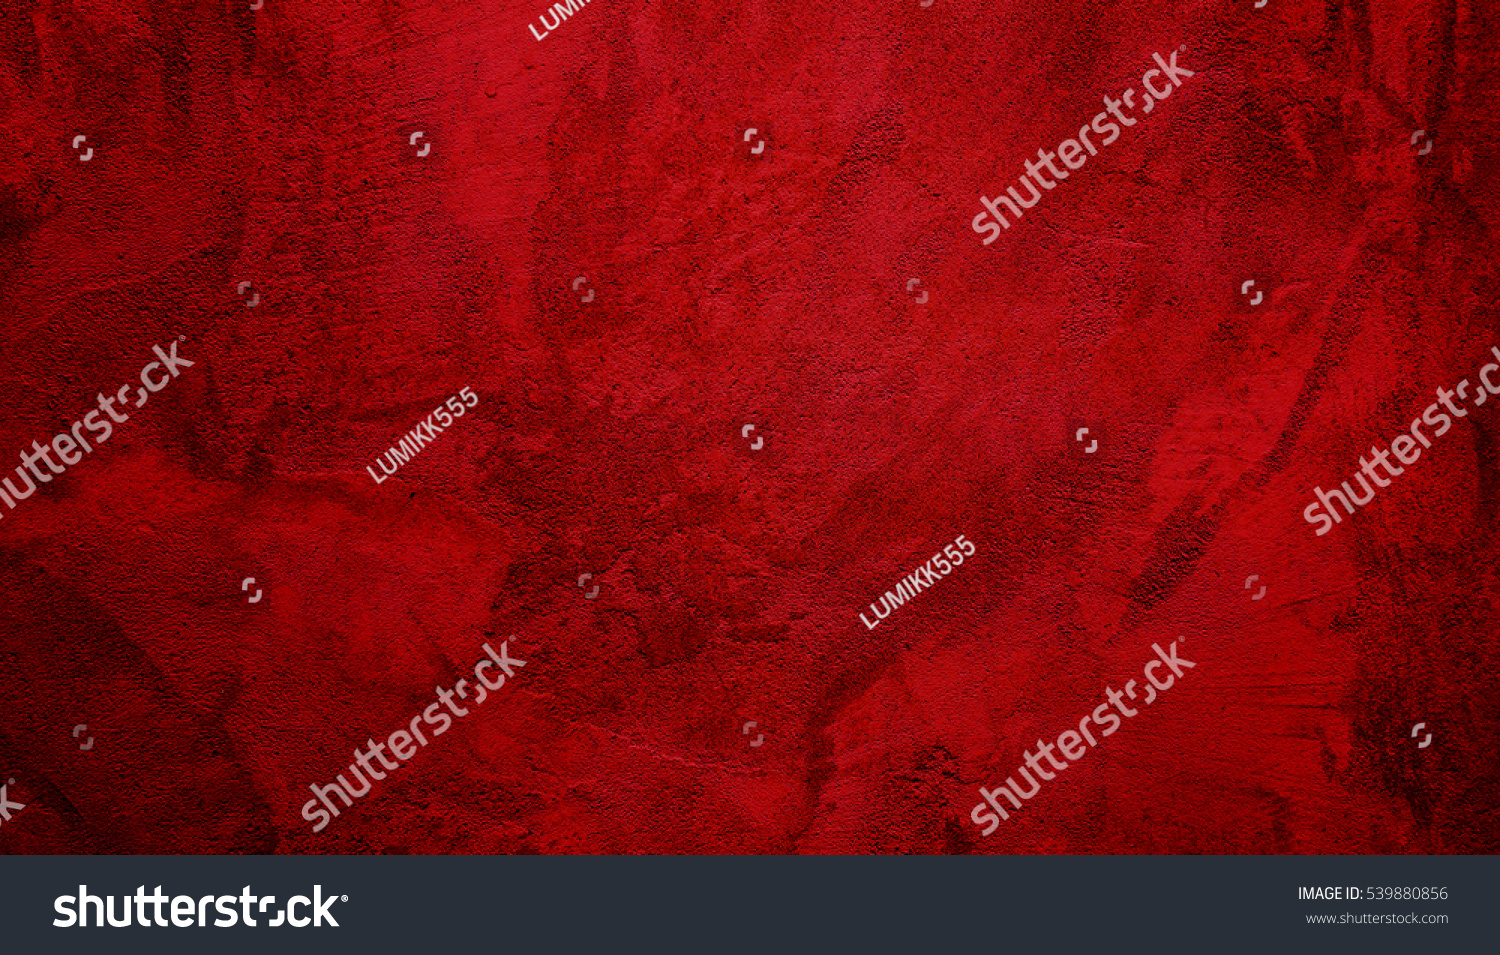 Beautiful Abstract Grunge Decorative Dark Red Stucco Wall Background. Valentines Christmas Design Layout. Art Rough Stylized Texture Banner With Copy Space. #539880856